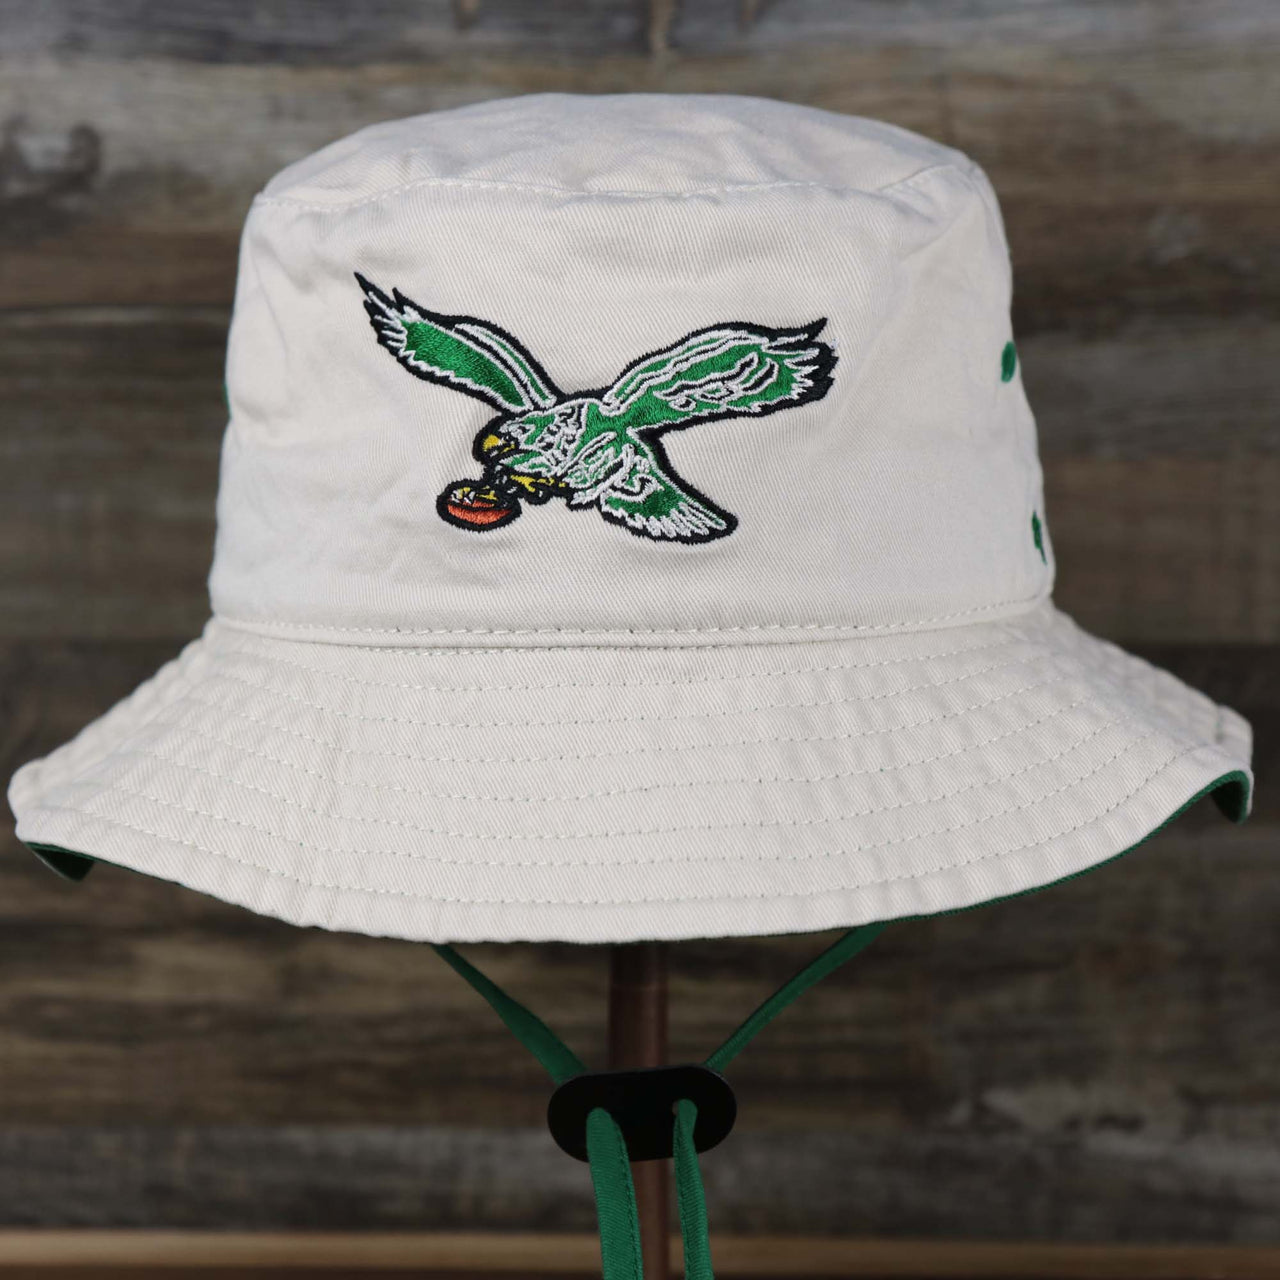 The front of the Throwback Philadelphia Eagles Vintage Bucket Hat | 47 Brand, Natural